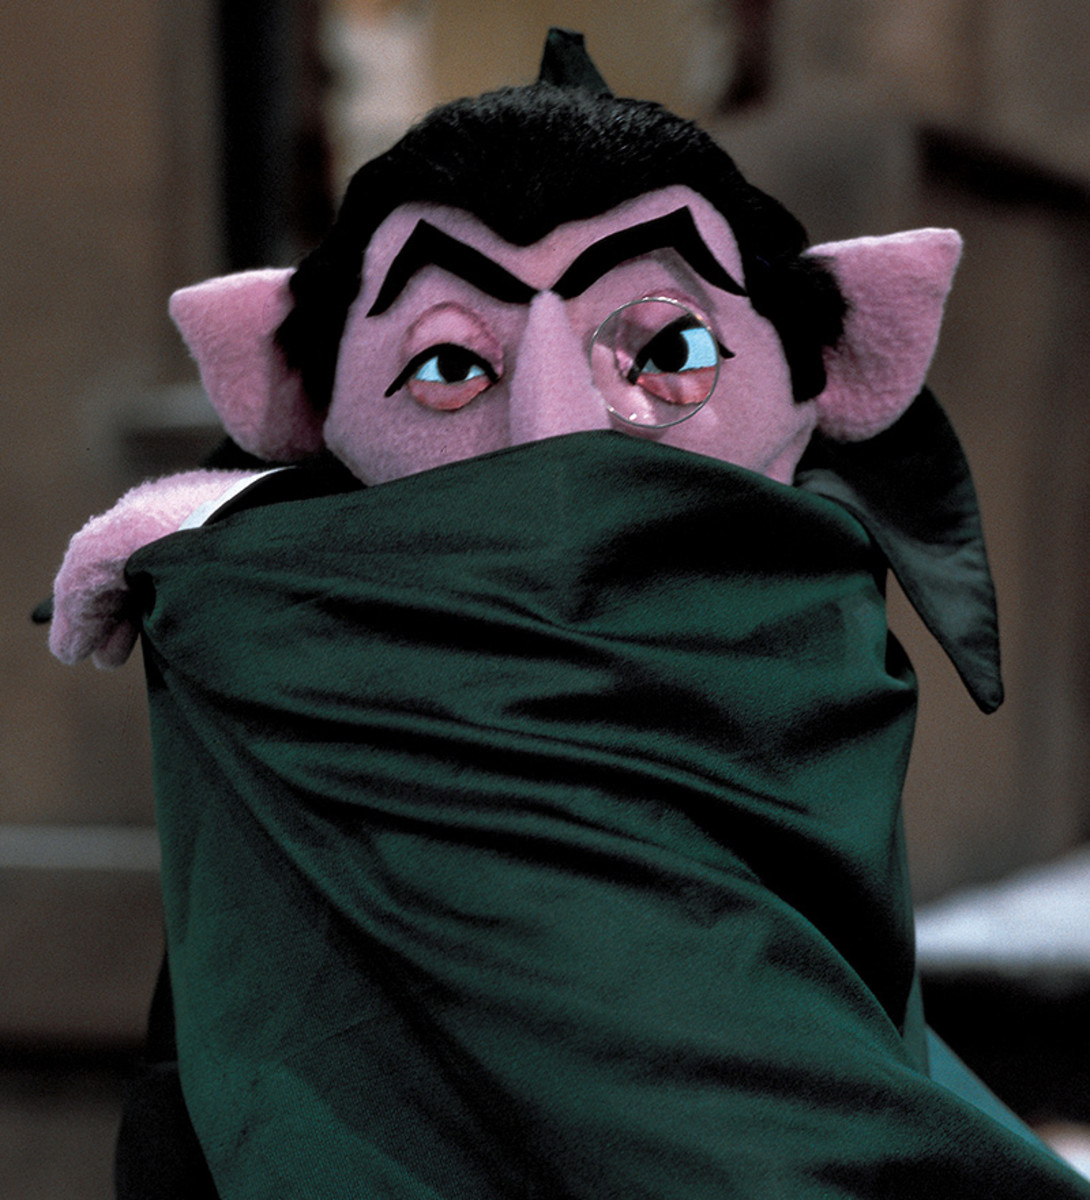 When I think of a math costume The Count always comes to mind.